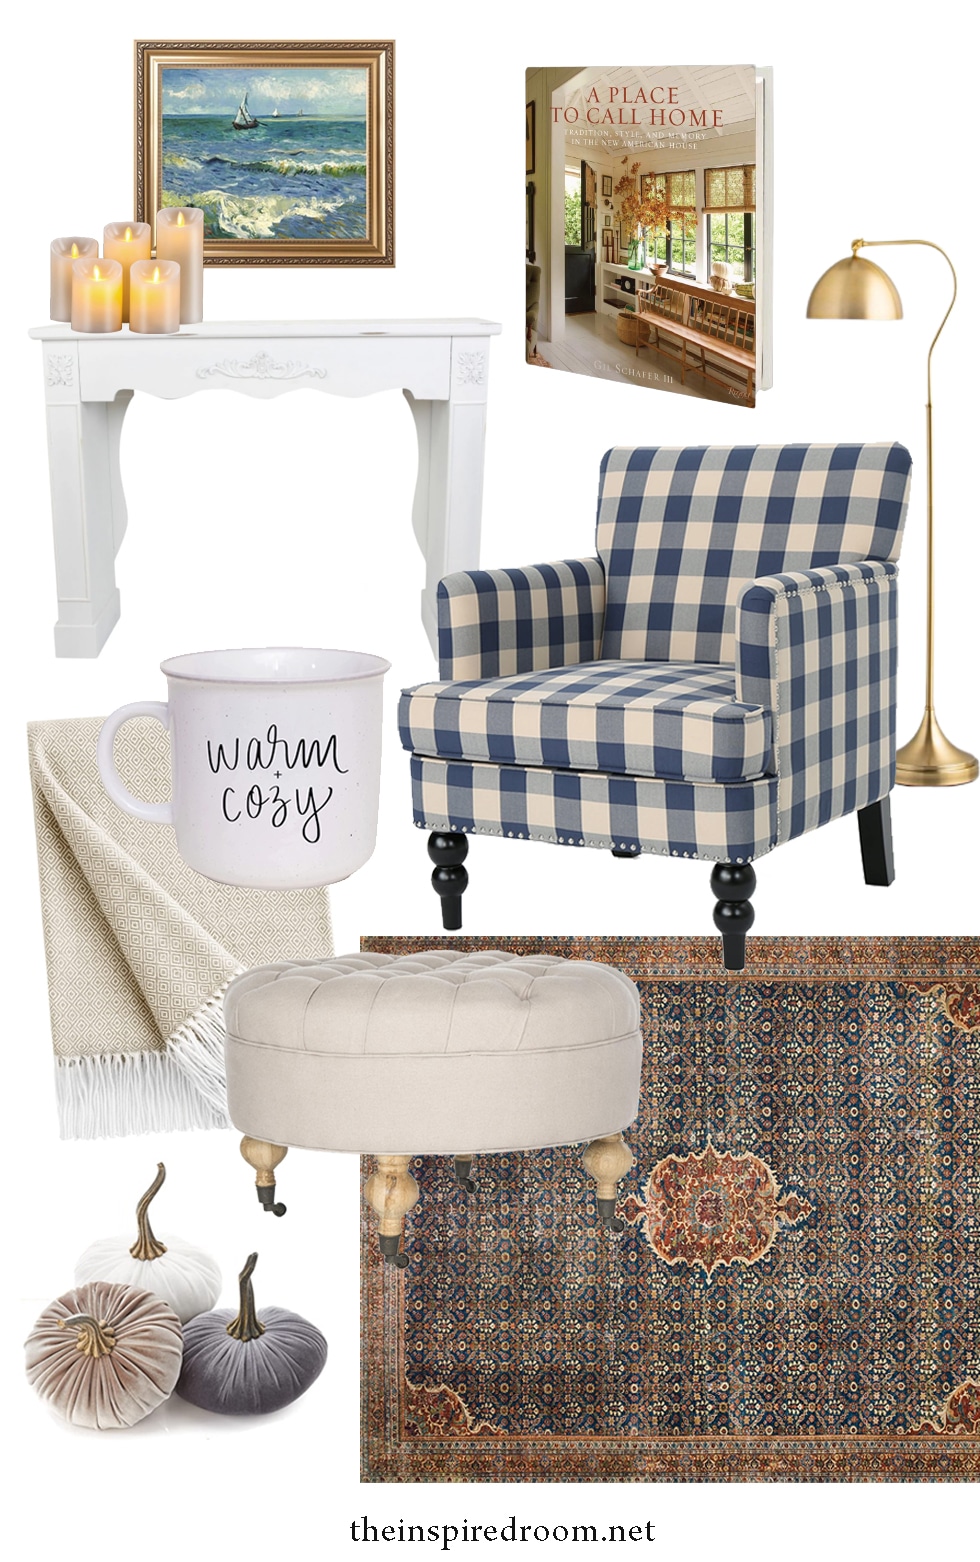 An Inviting Curl Up by the Fire Mood Board (get the mood with a faux fireplace mantel!)